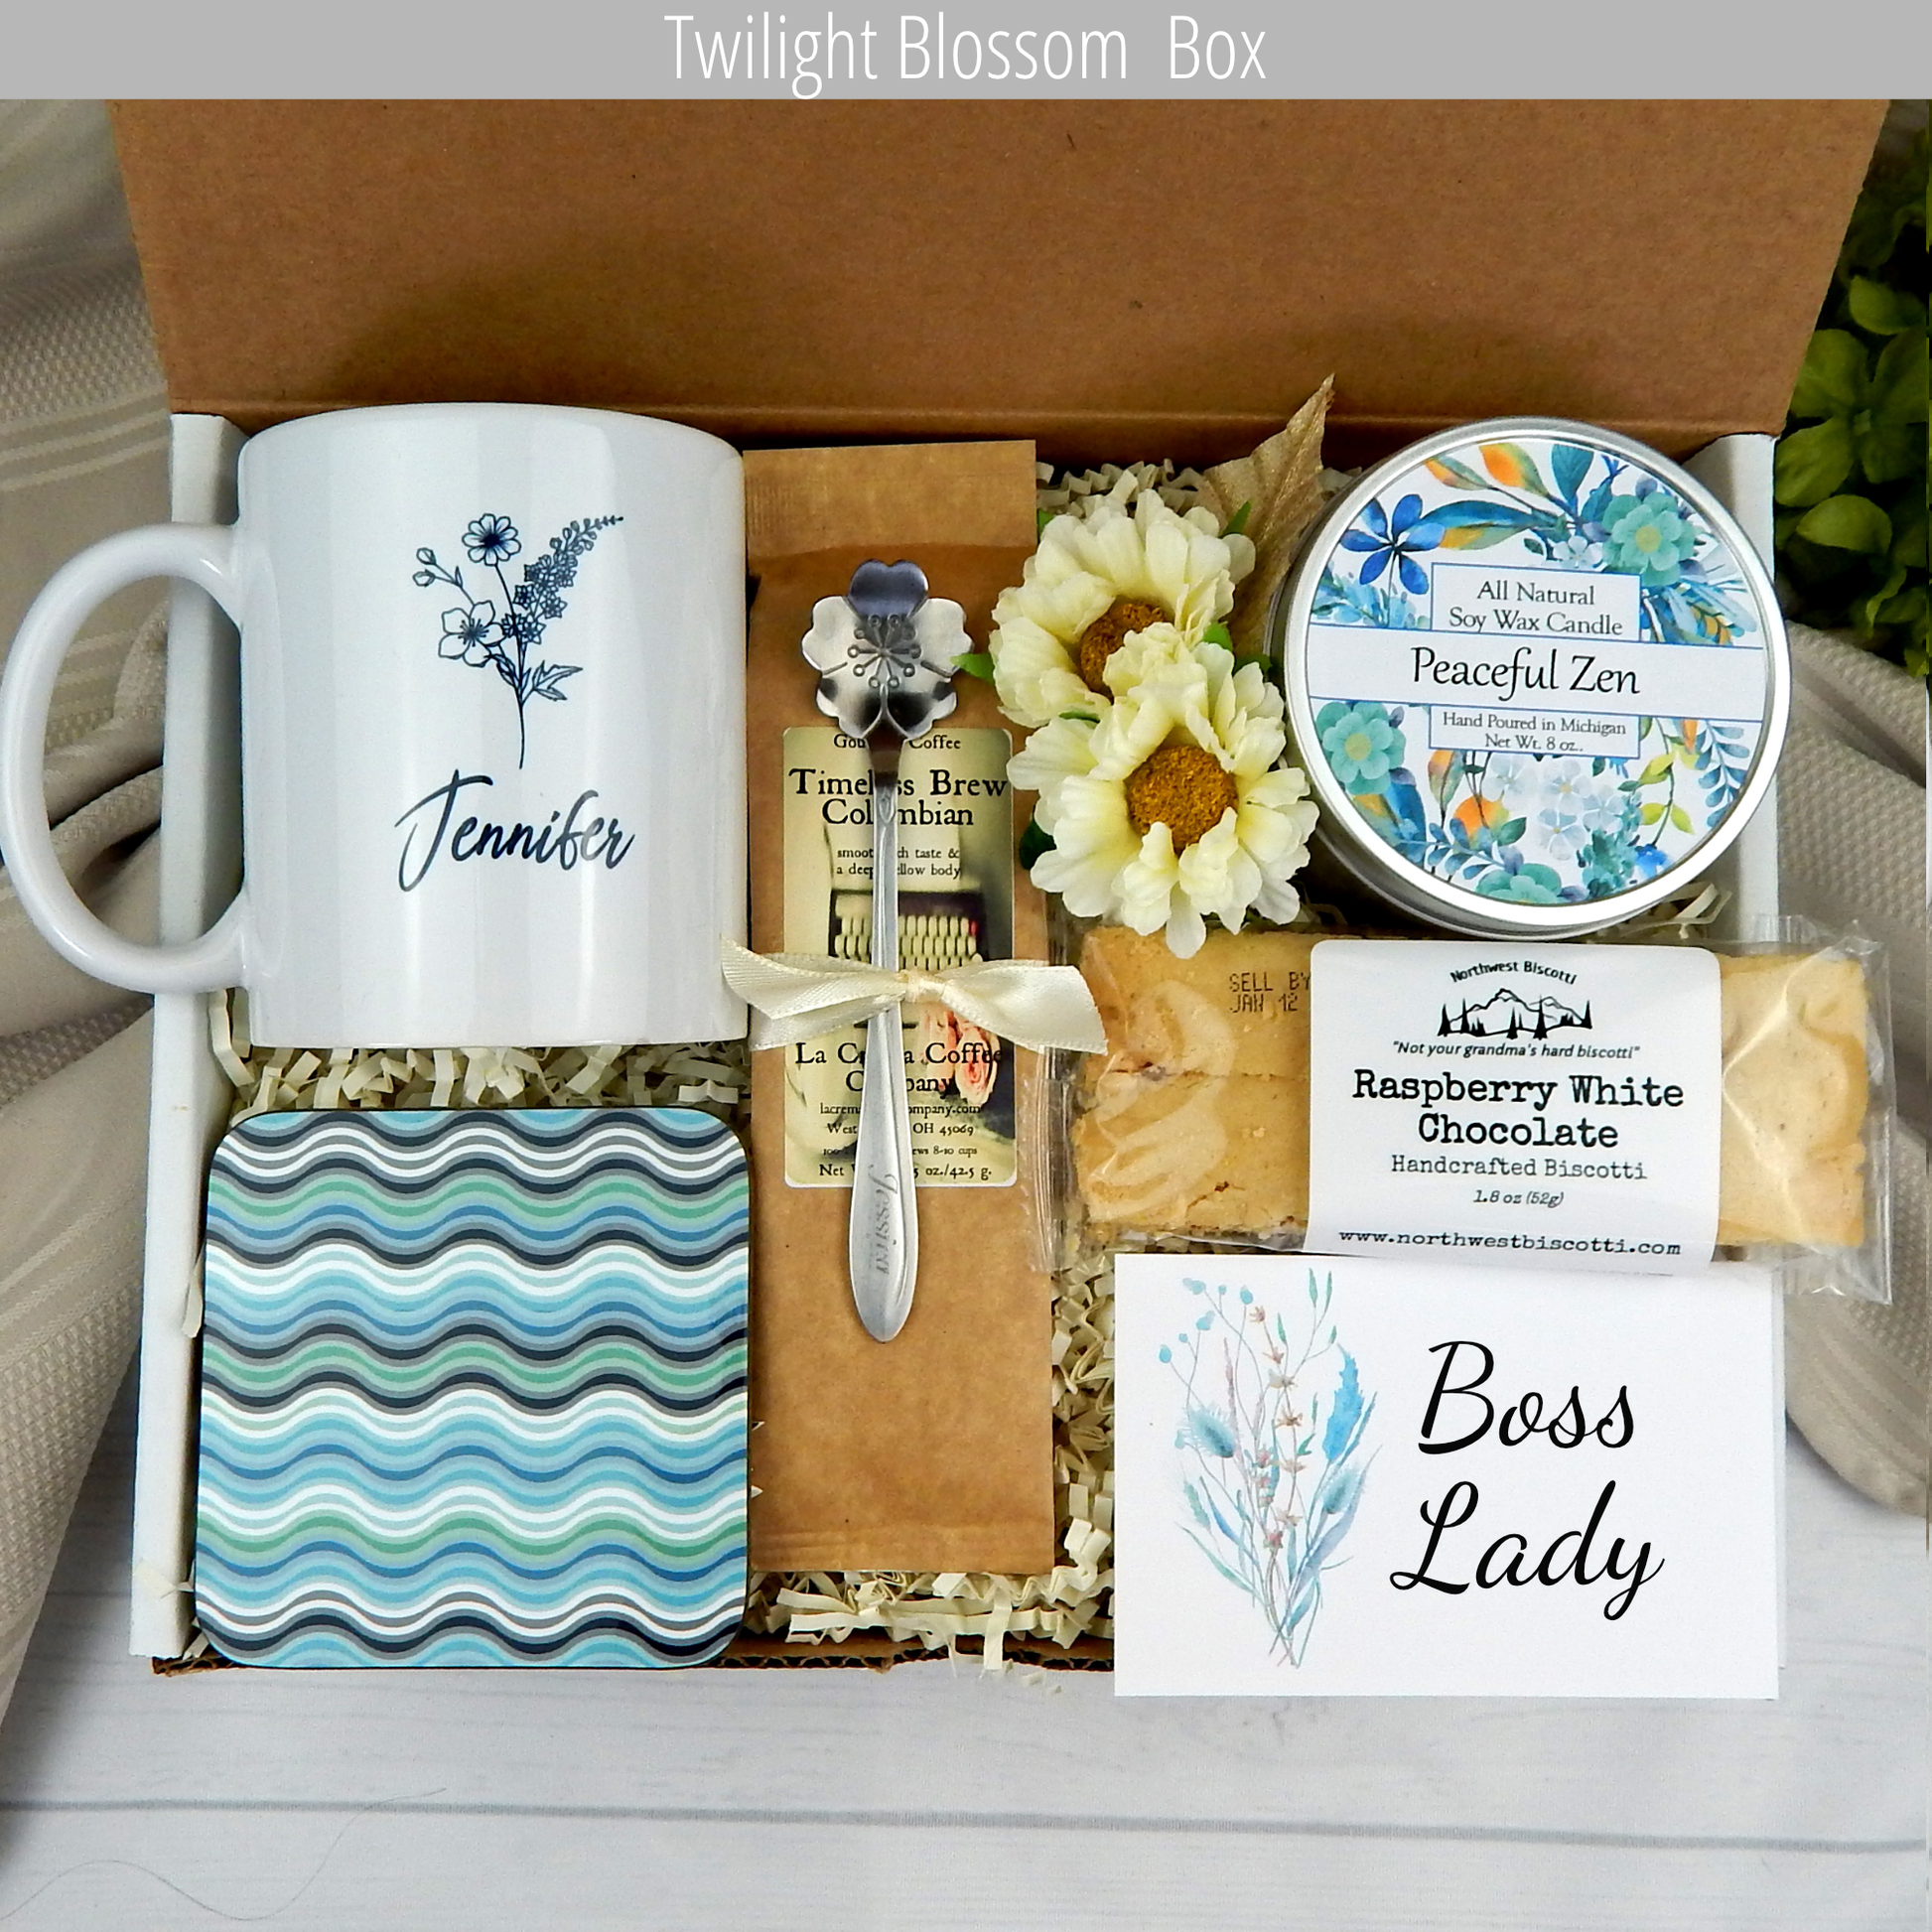 Toast to her achievements: Manager's gift basket with a custom mug, coffee, scrumptious goodies, engraved spoon, and a candle for the boss lady.